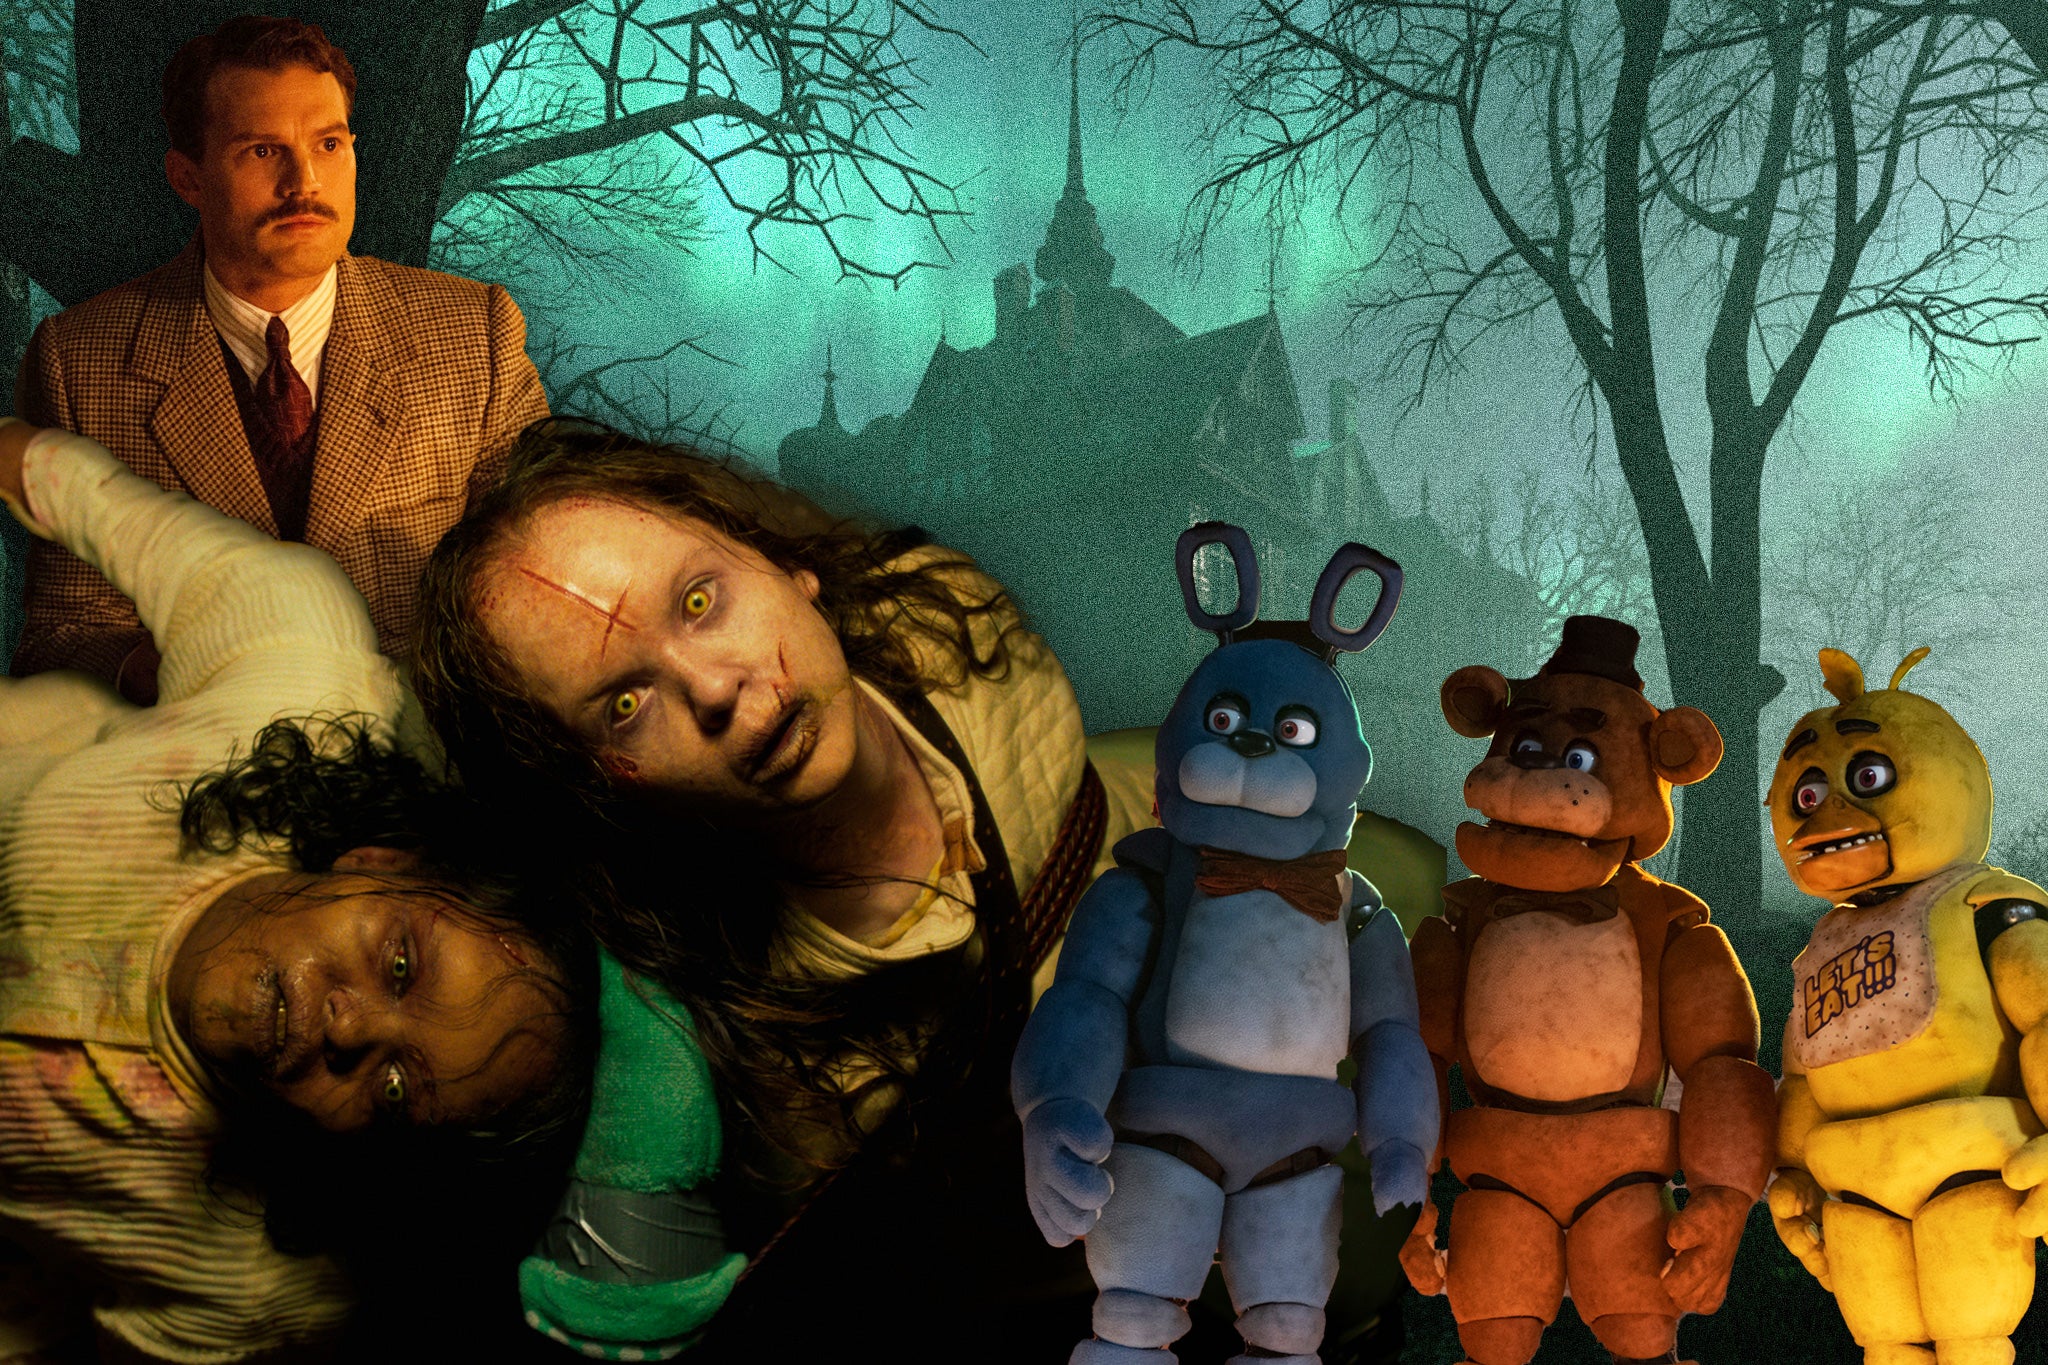 13 Great PG-13 Horror Films to Watch With Five Nights at Freddy's